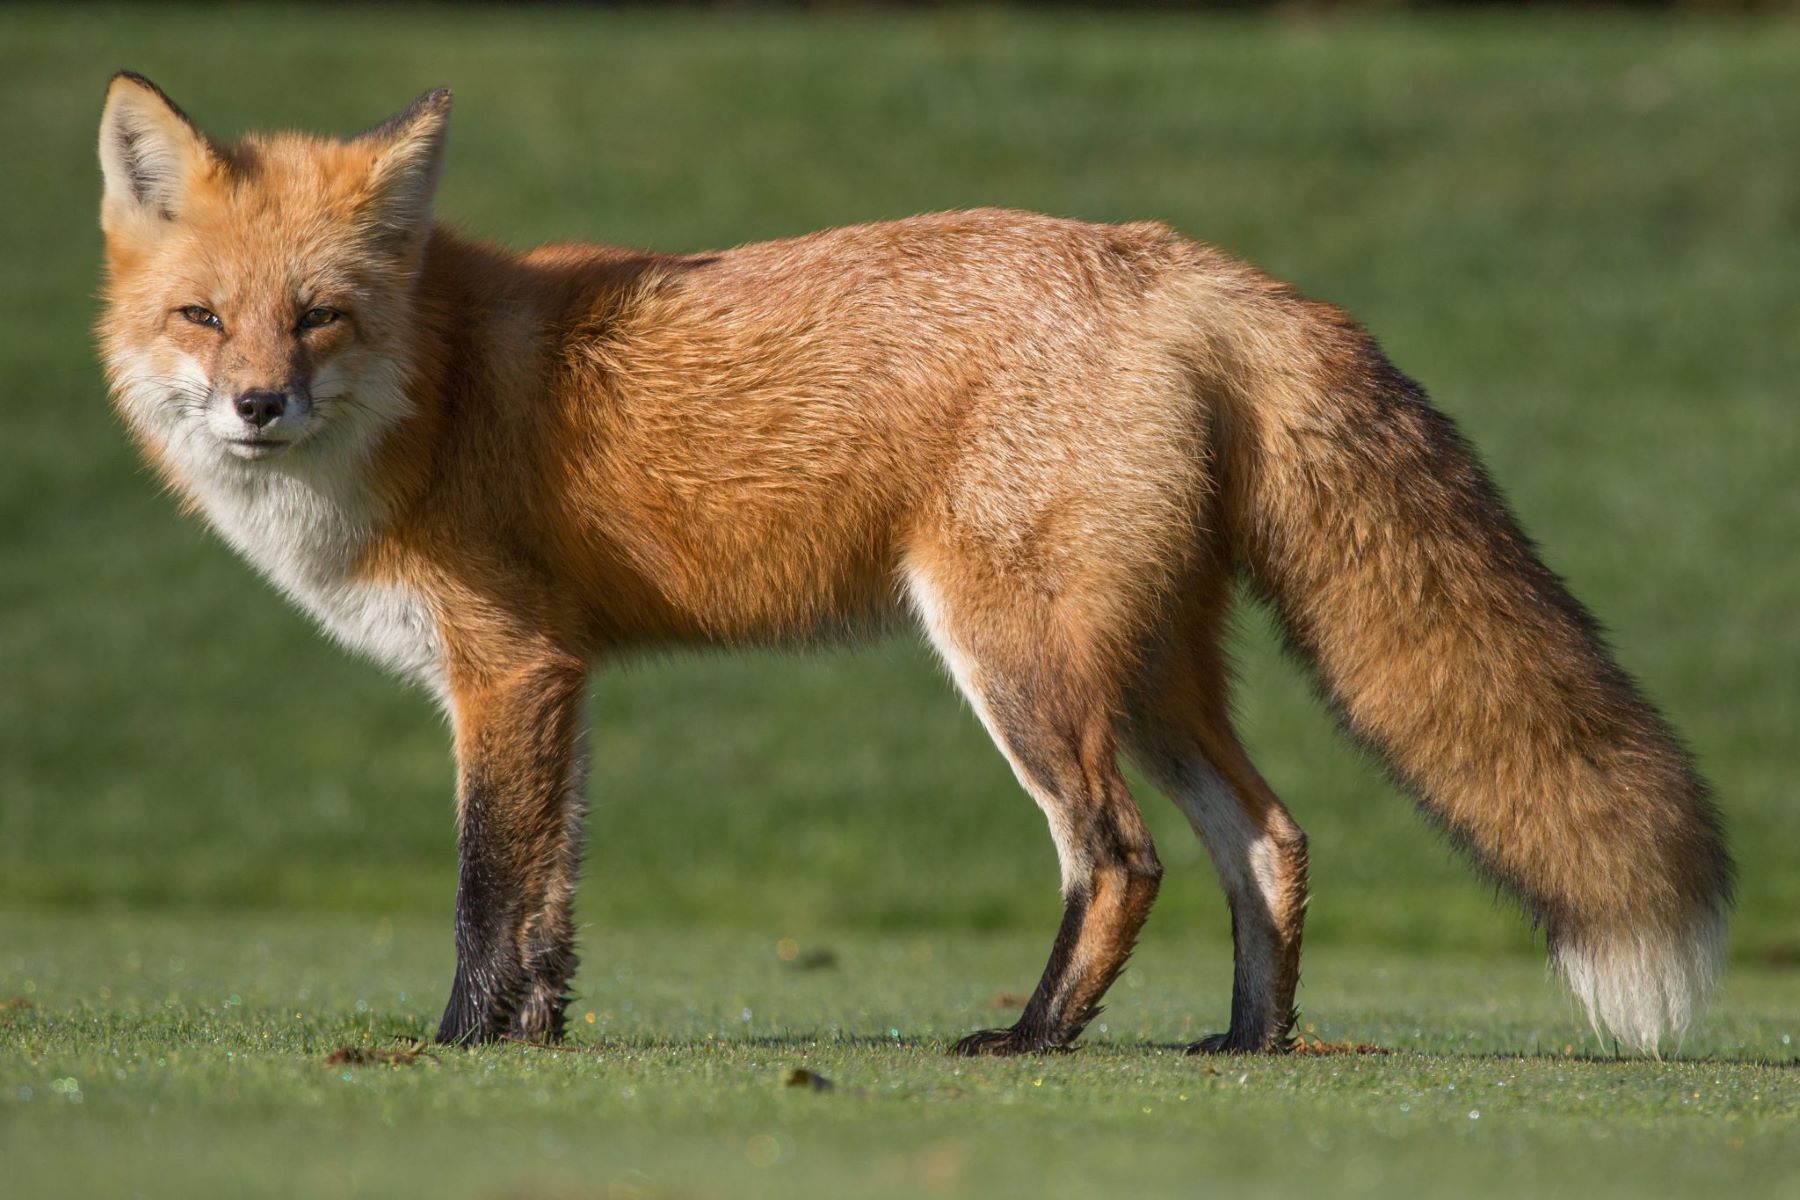 The Surprising Truth About Foxes: Are They Closer To Dogs Or Cats? And Why They Haven't Been Domesticated Will Shock You!